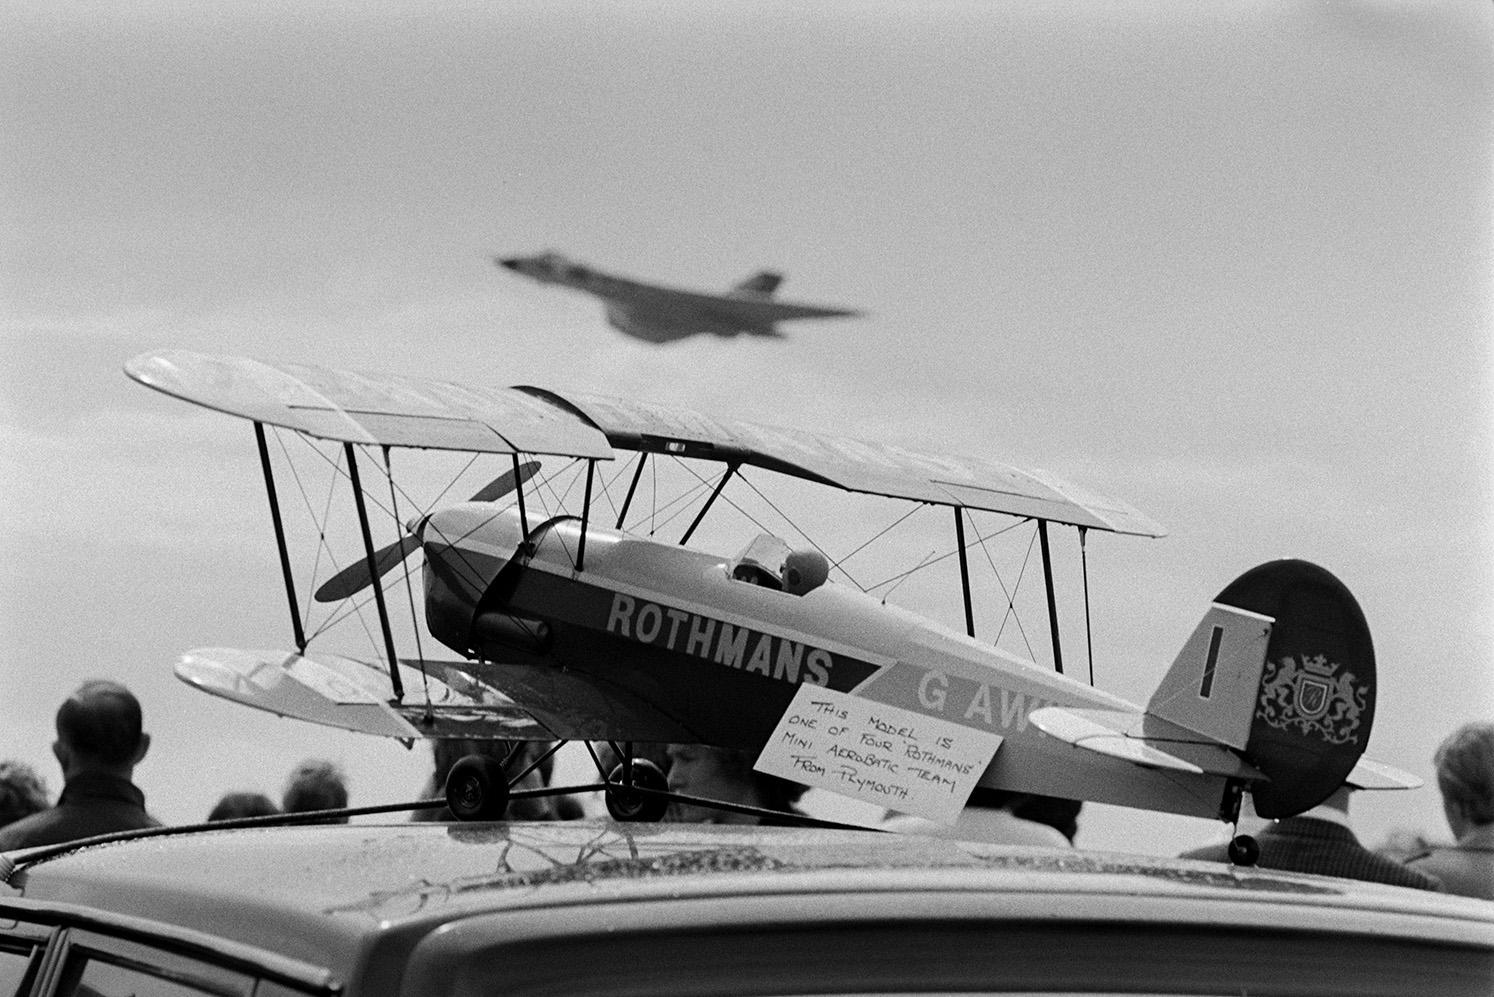 Spectators watching an aeroplane at the Chivenor Air Show, at the Royal Marine Base in Braunton. In the foreground a model of a Rothmans plane is visible. A sign next to it states it is one of four Rothmans Mini Aerobatic team from Plymouth.